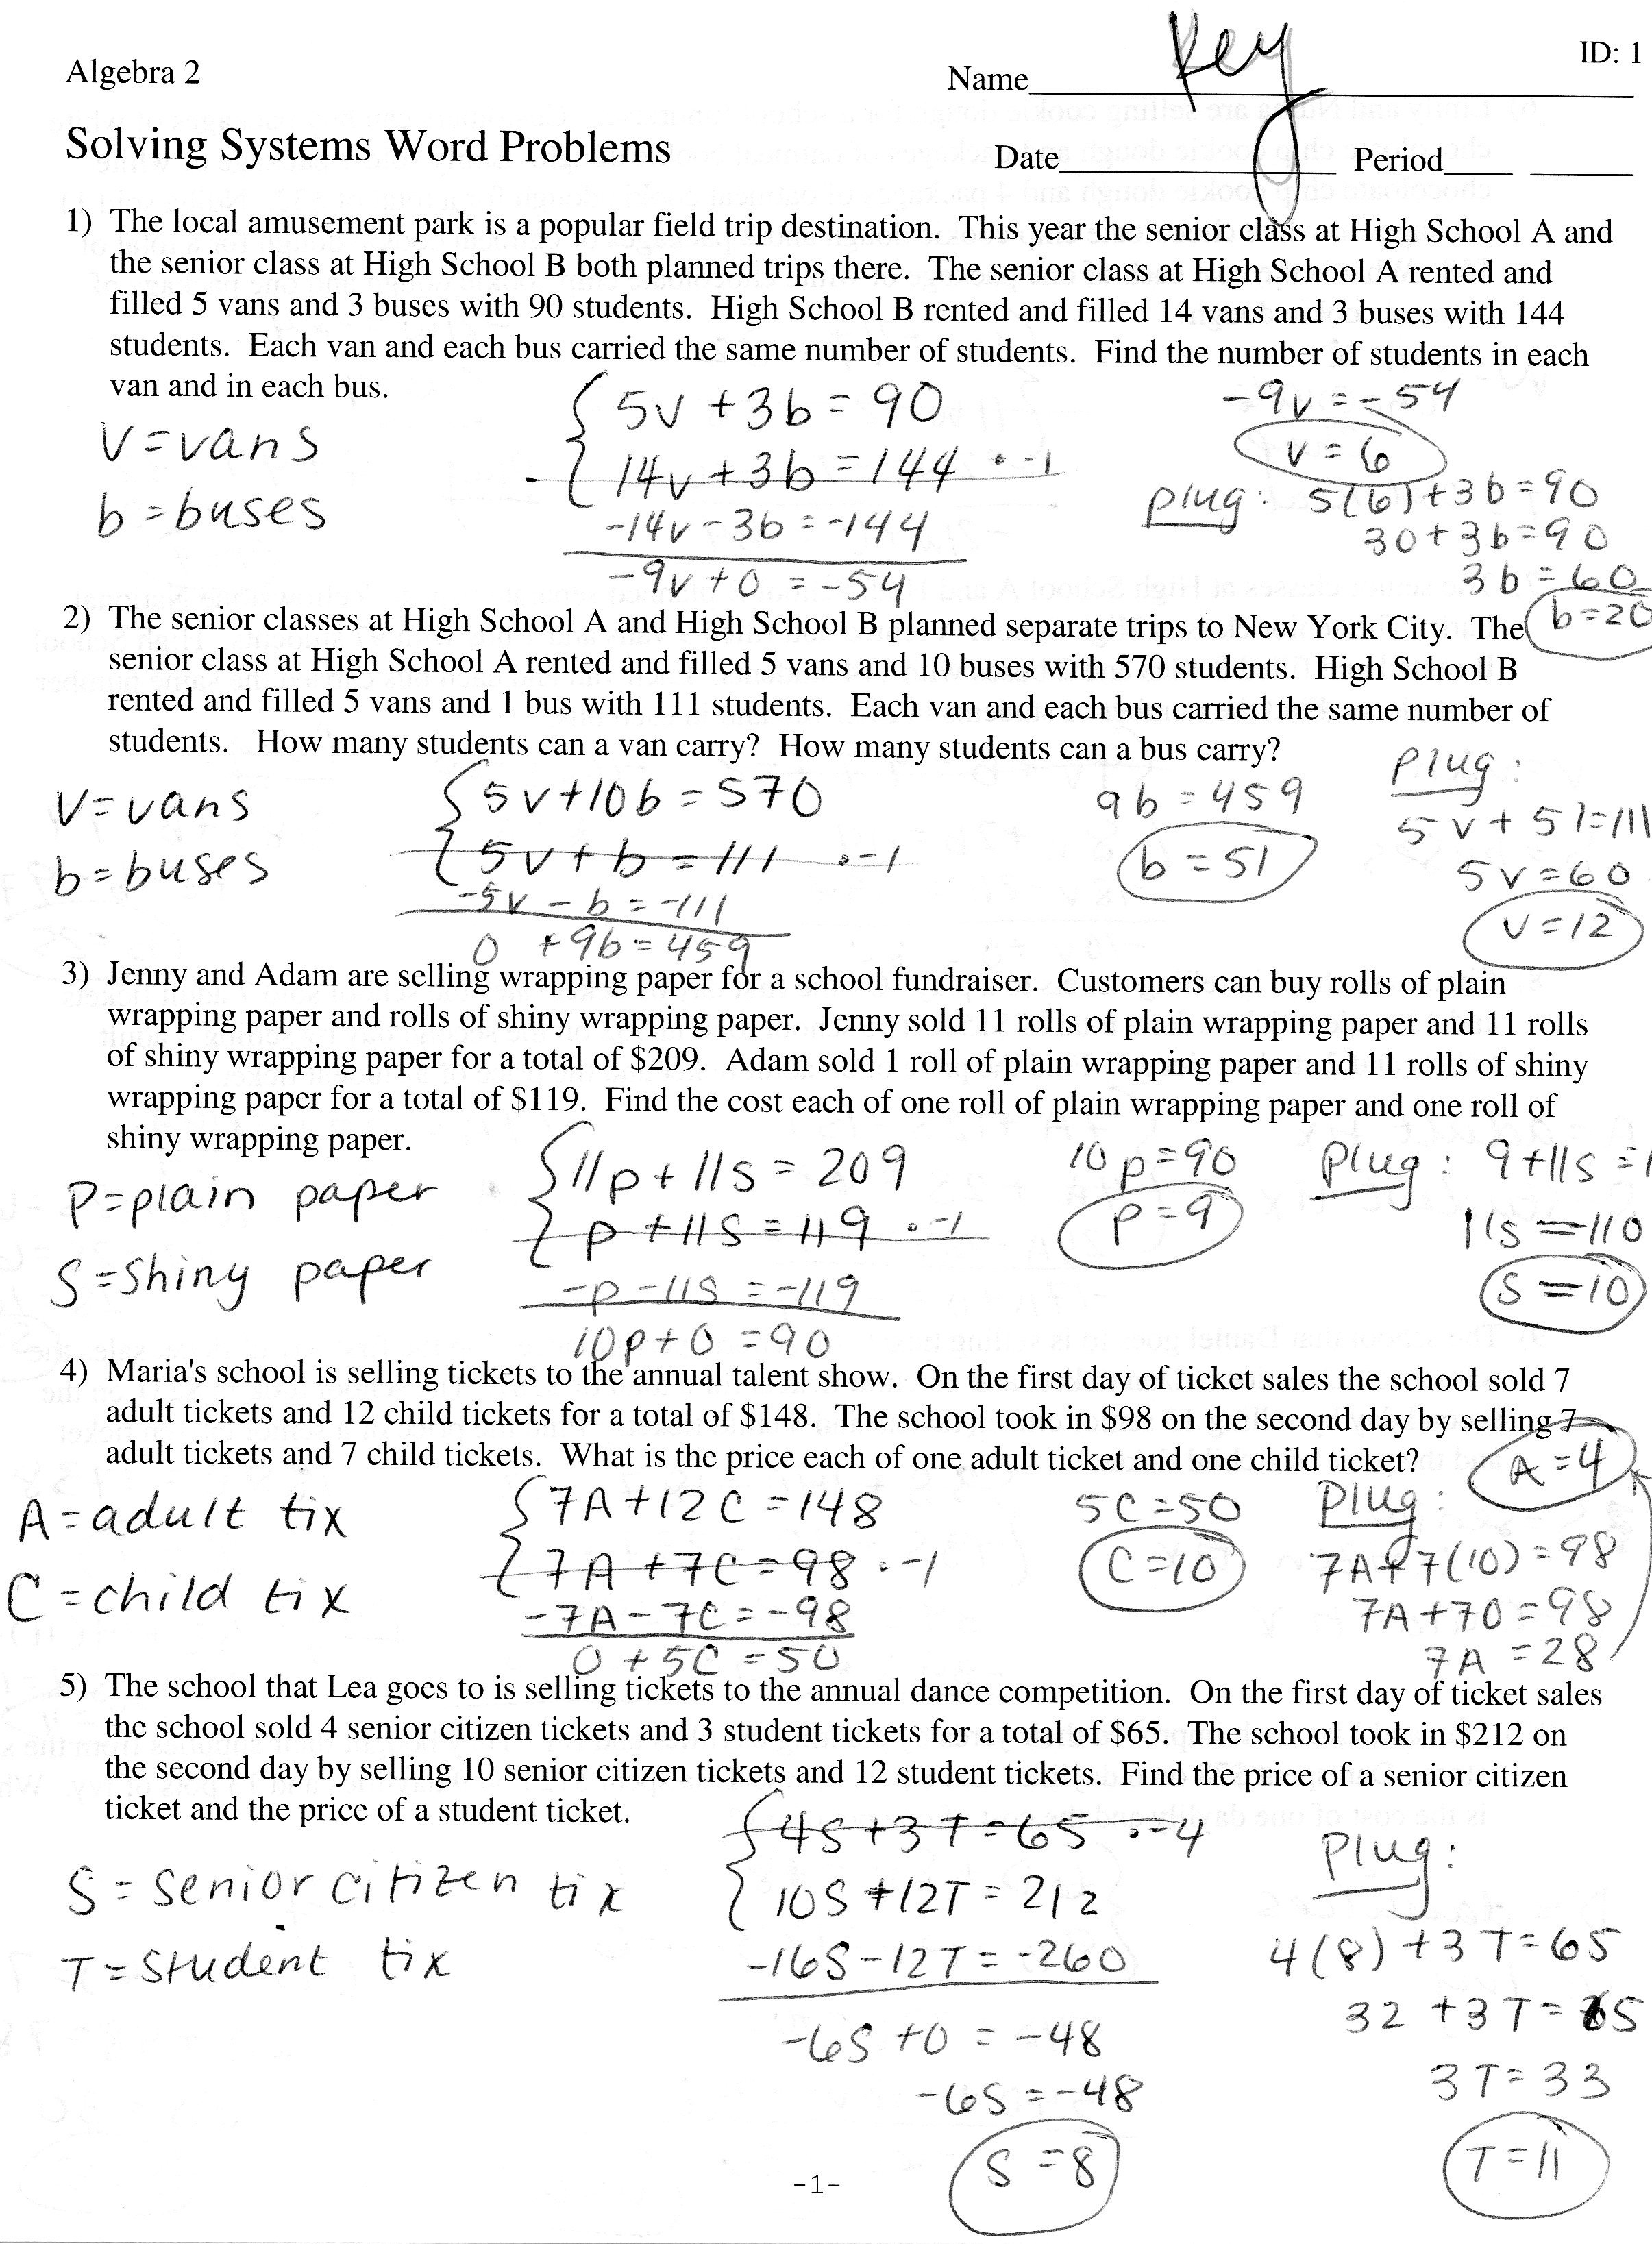 New Solve Linear Equations Kuta For Systems Of Linear Equations Word Problems Worksheet